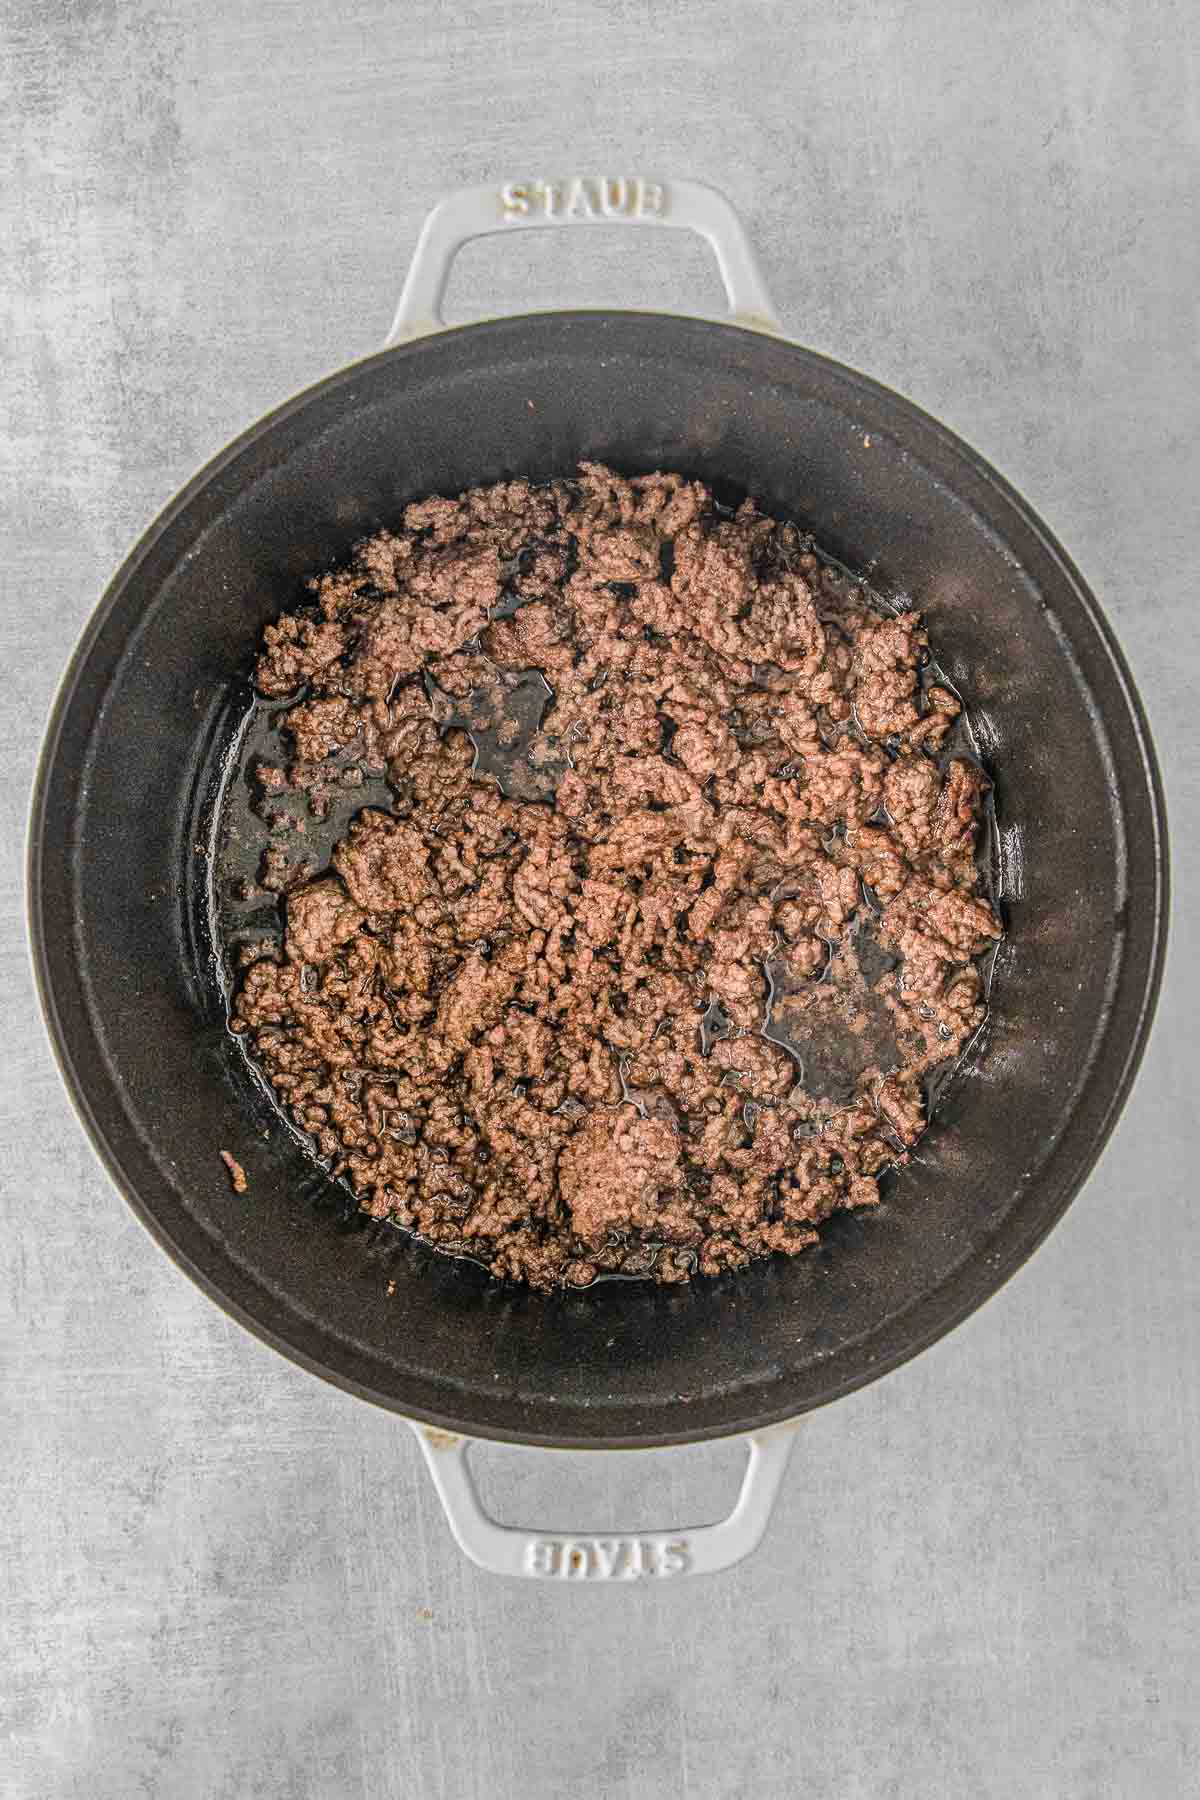 hamburger meat browned and crumbled in a cast iron skillet.